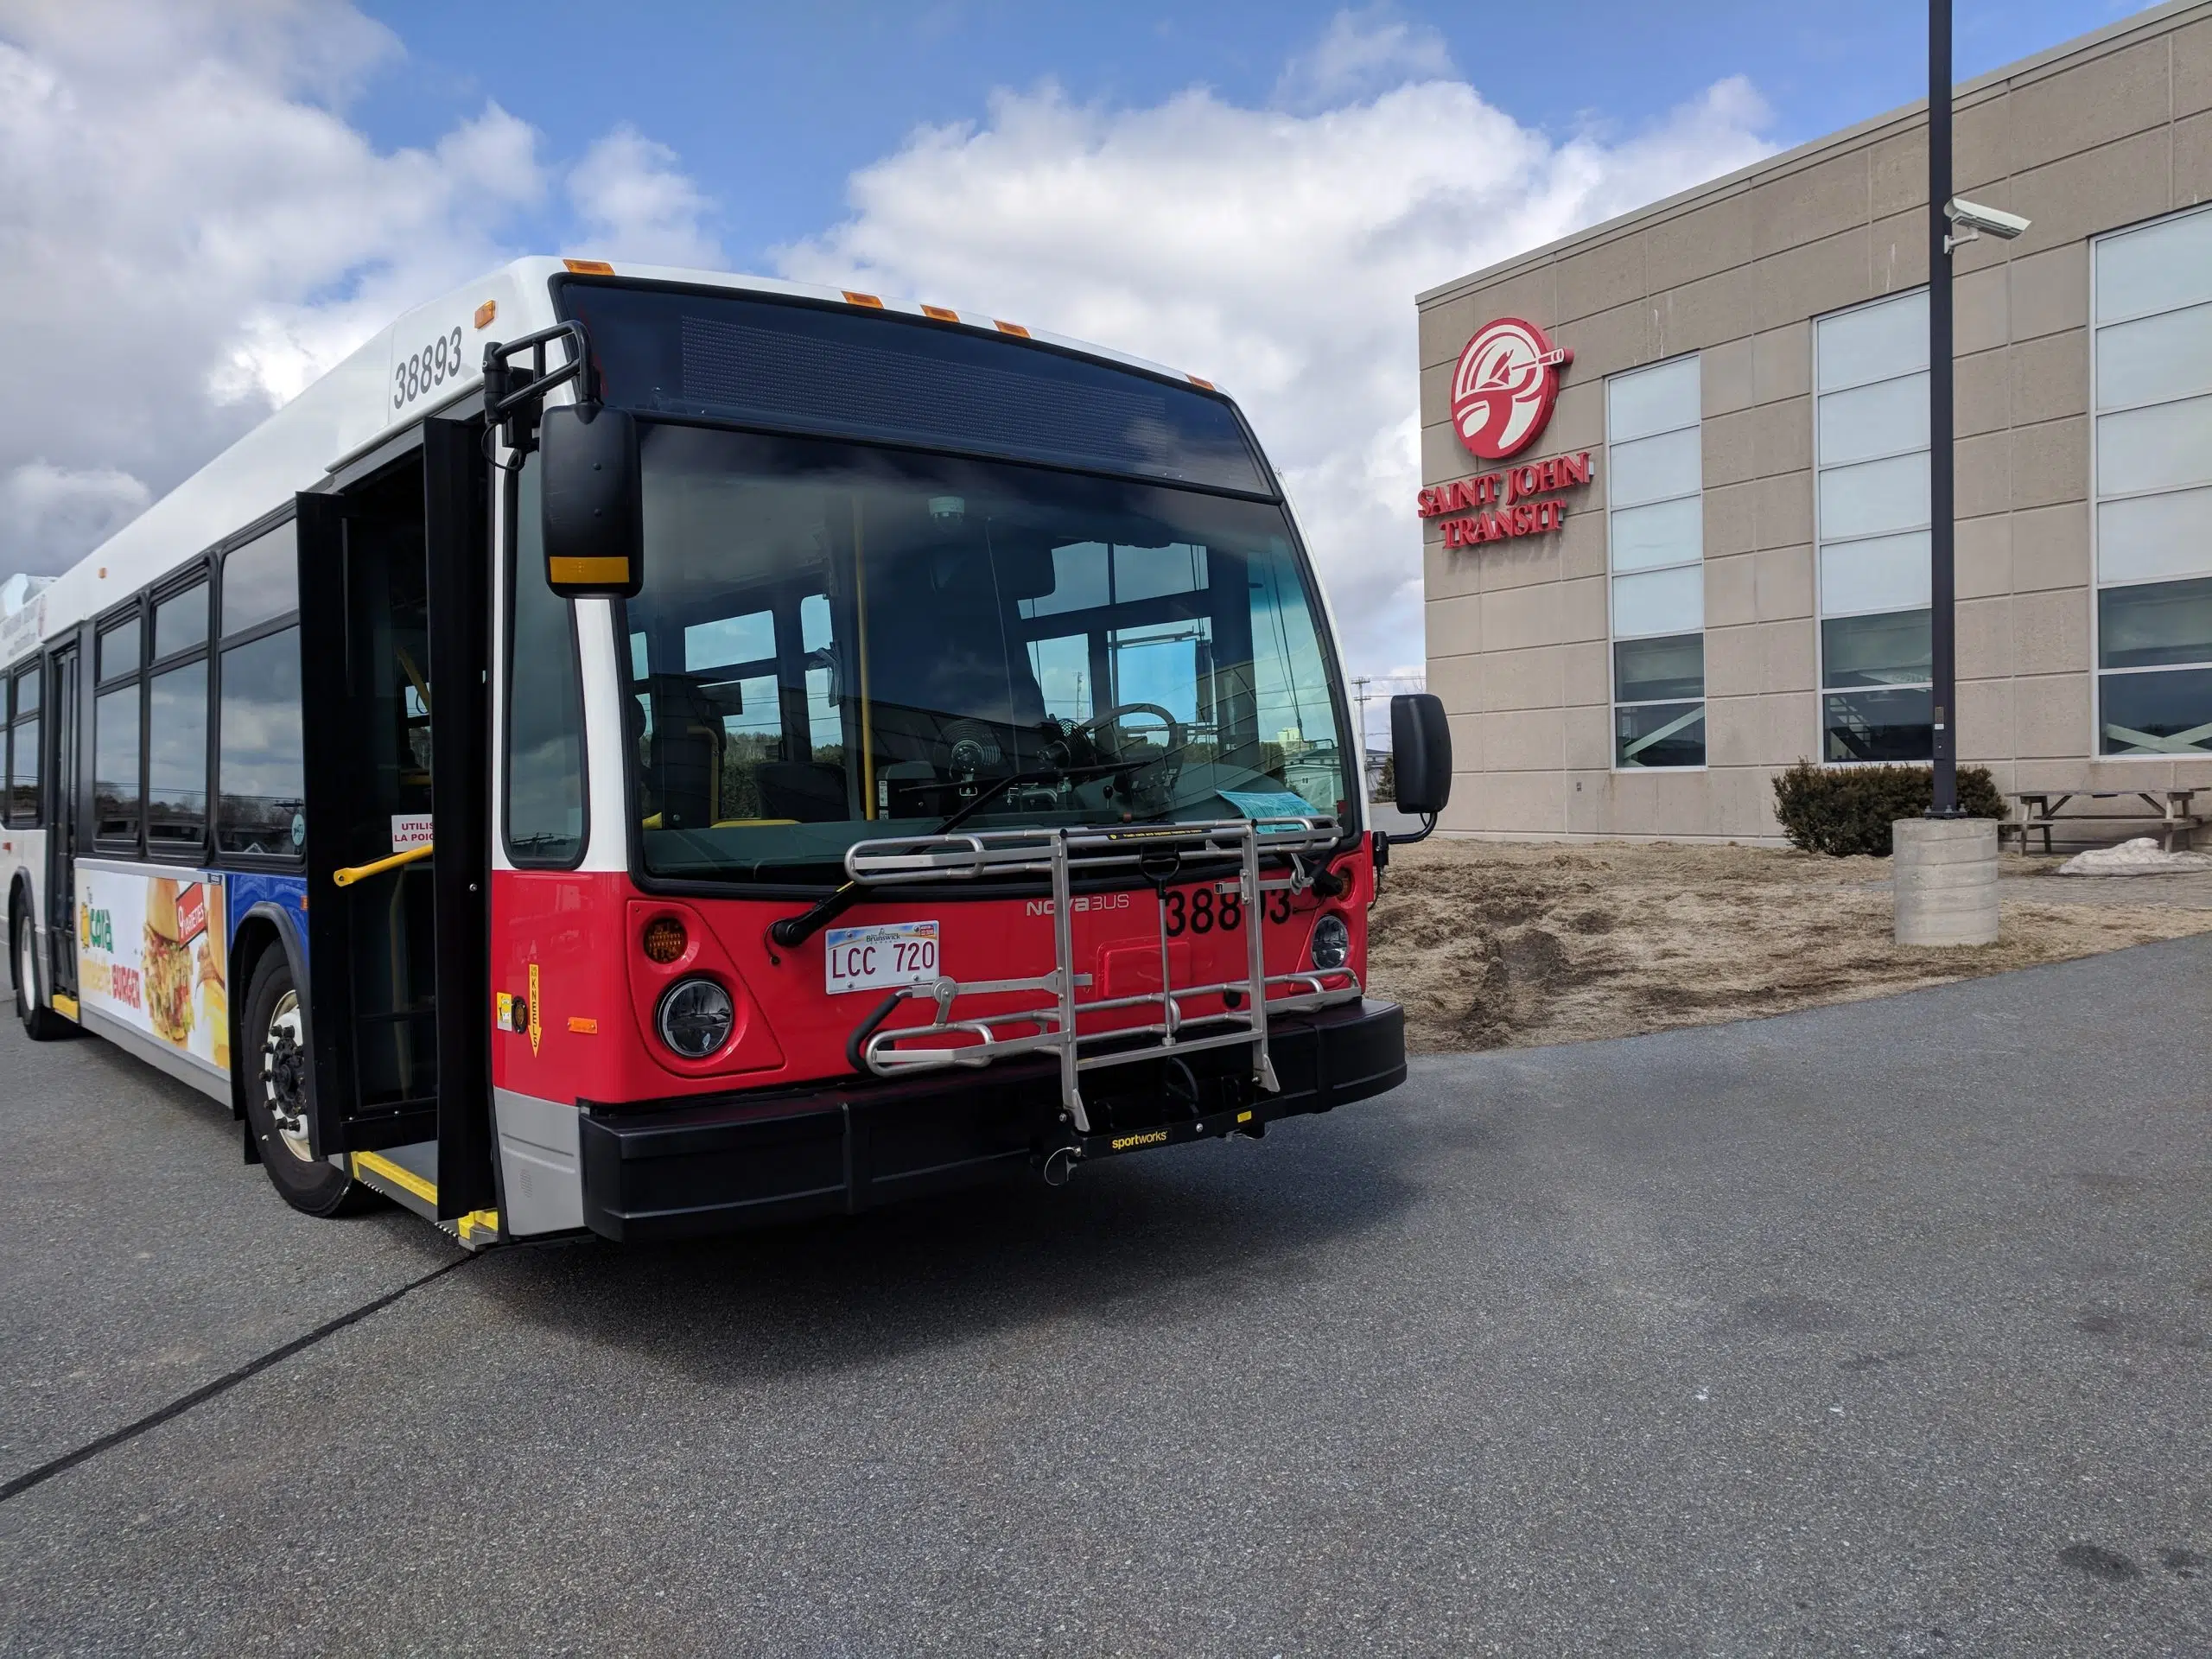 Transit Services Receiving Government Assistance For COVID-19 Impacts